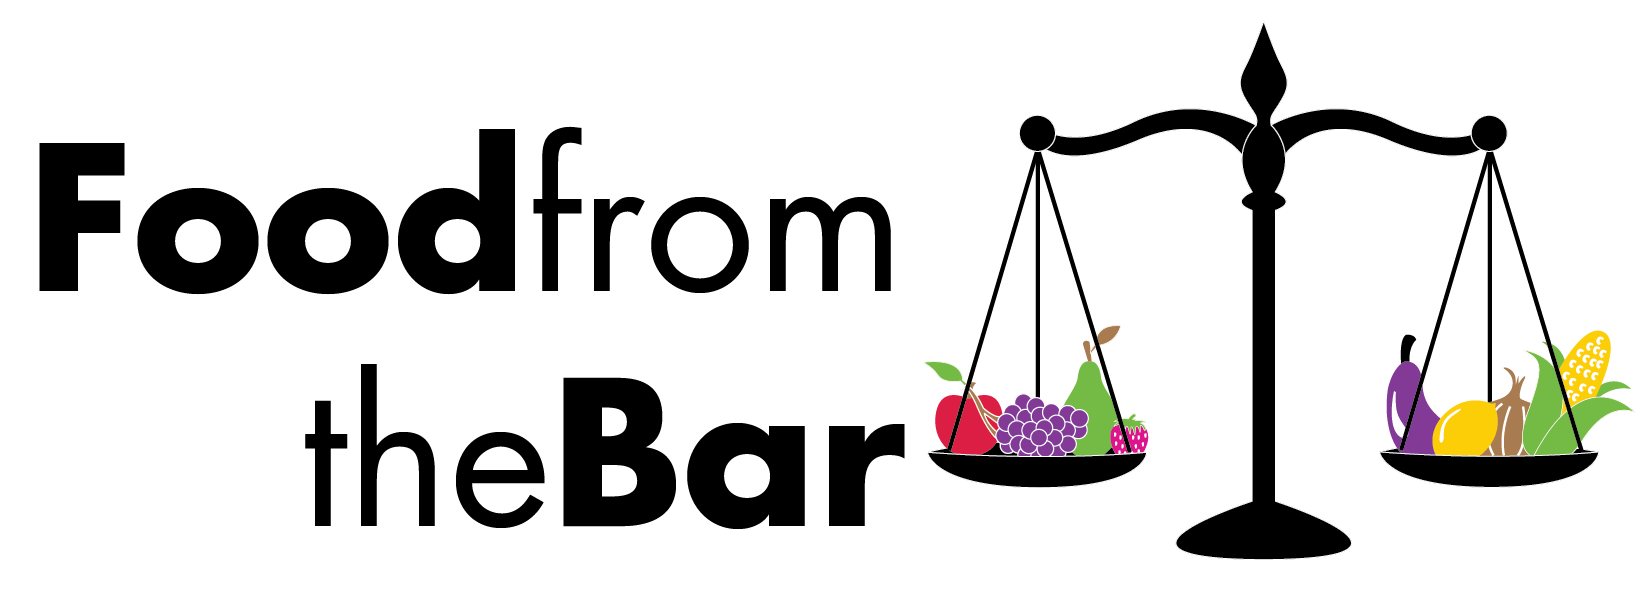 food from the bar logo.png